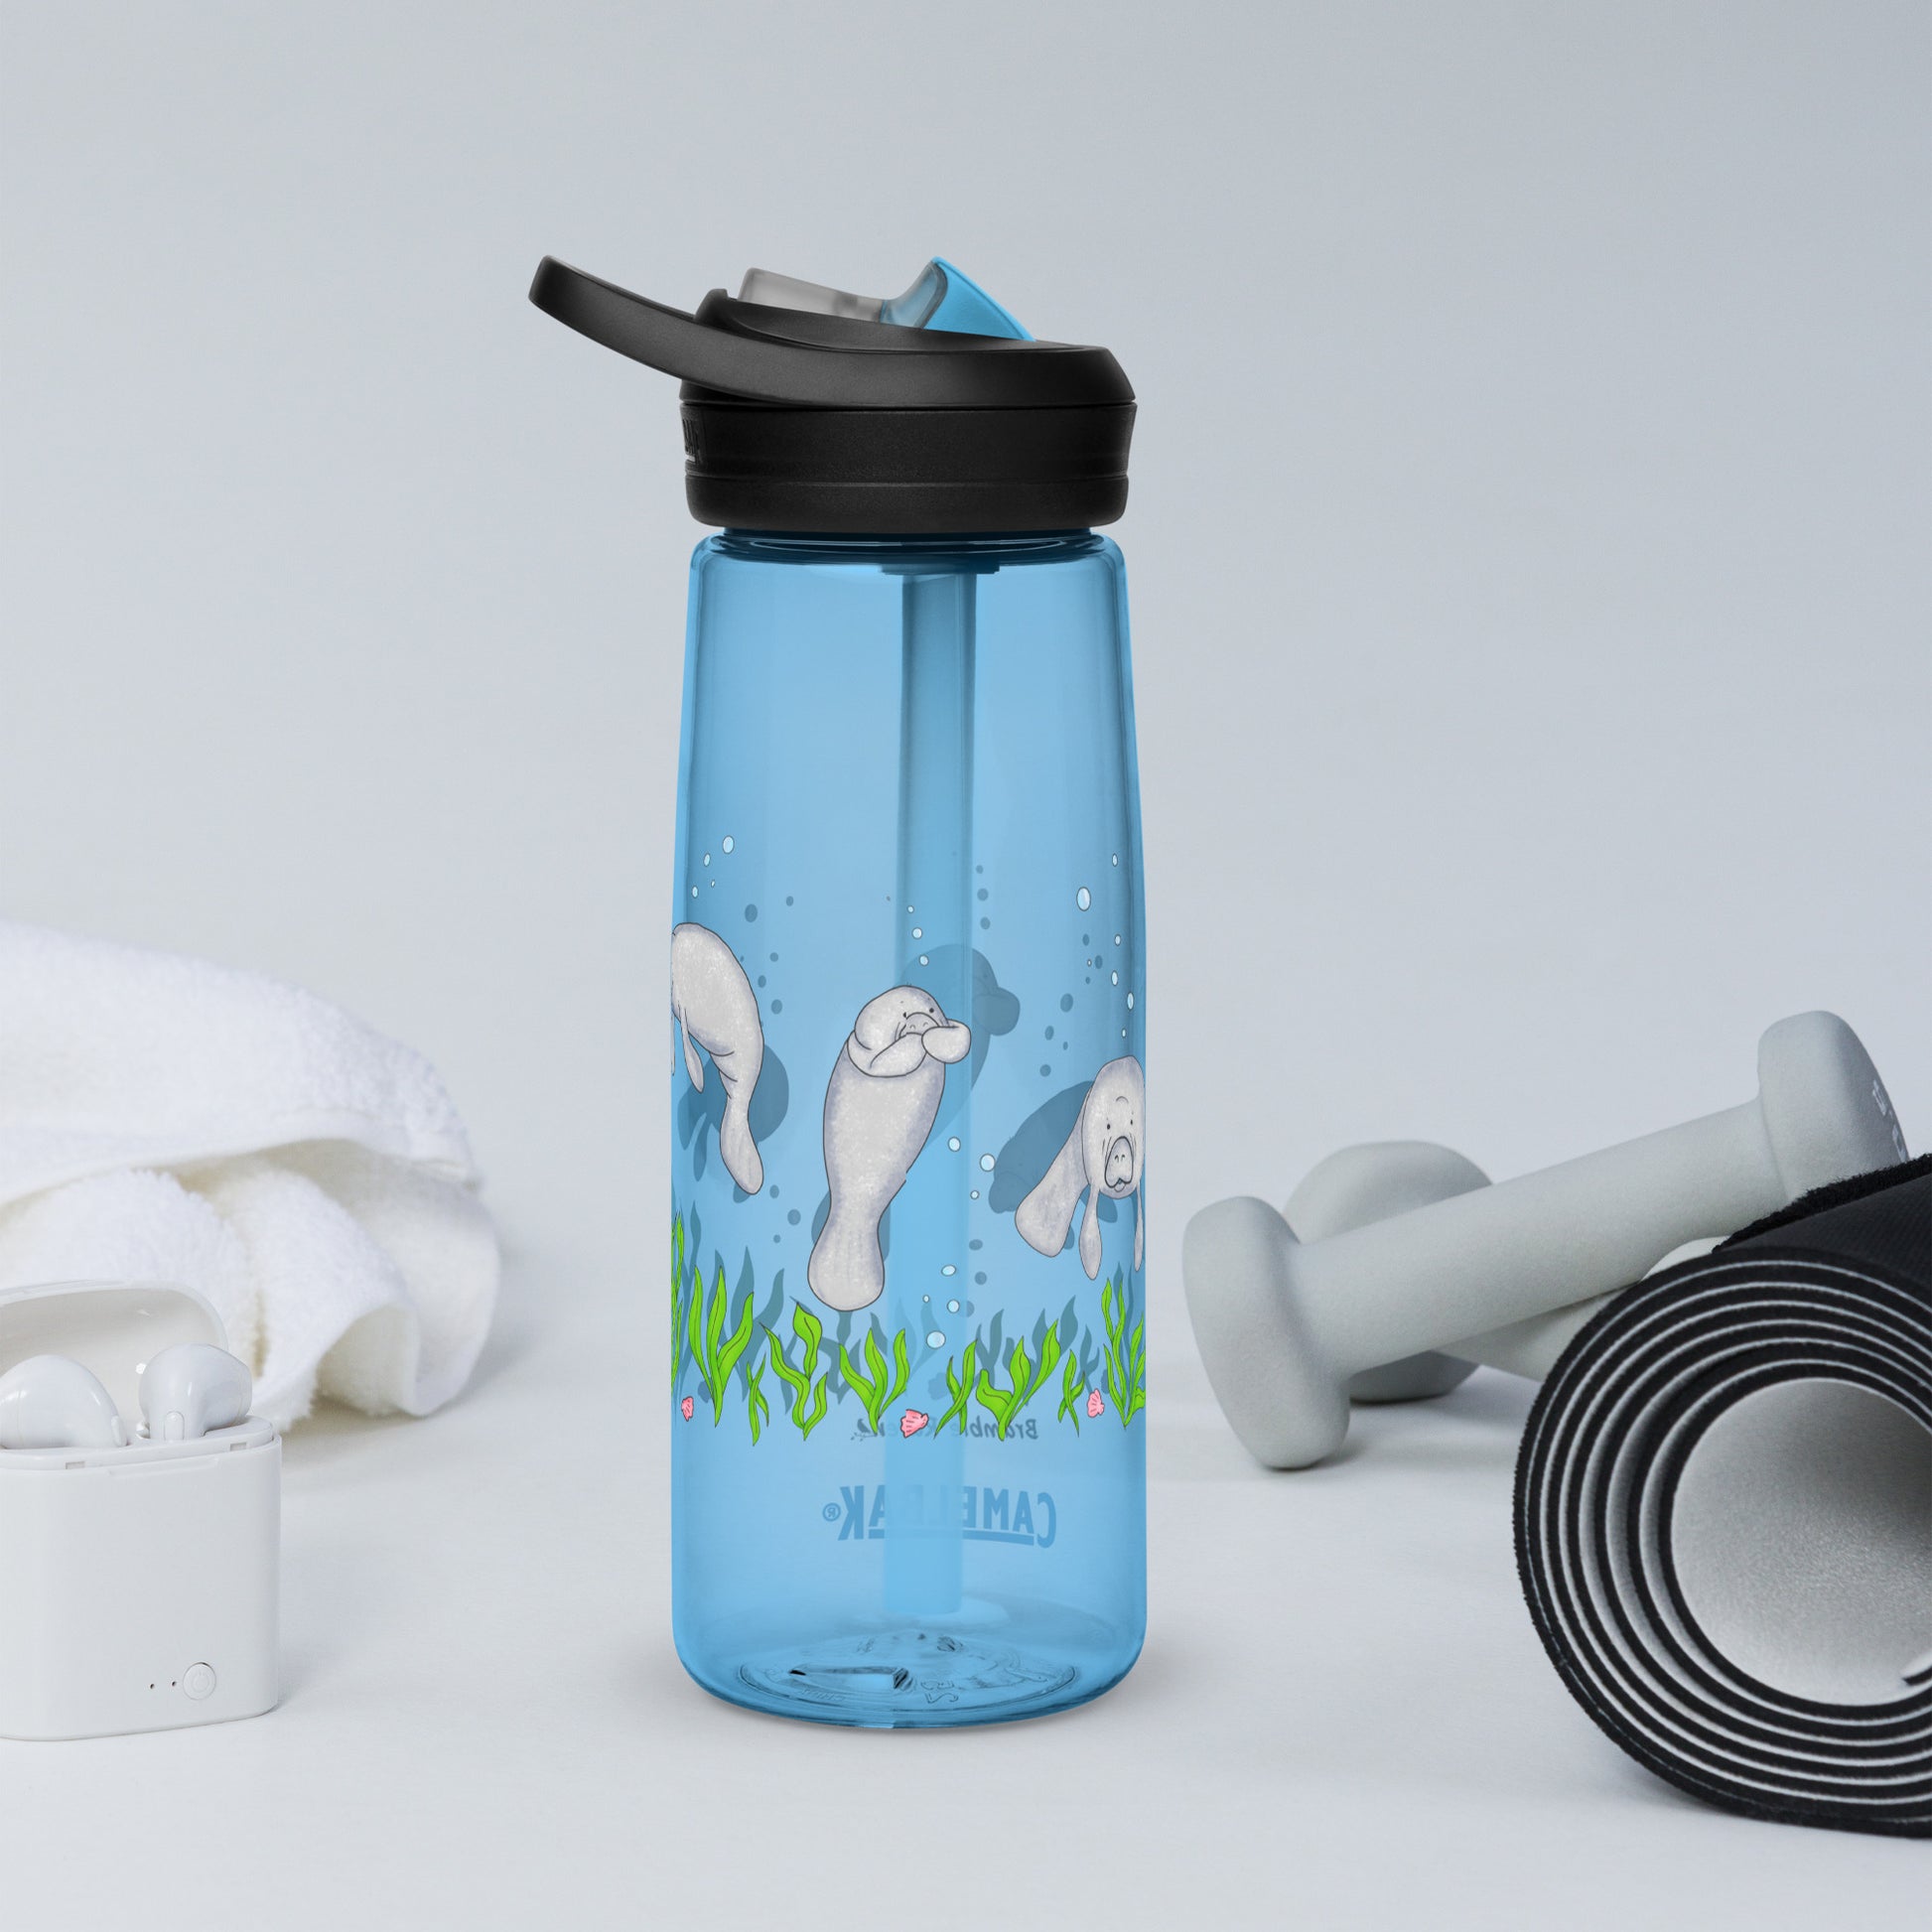 25 ounce sports water bottle with spill proof lid and bite valve. Ligh blue stain and odor-resistant BPA-free plastic with manatee designs around the bottle, swimming above the seaweed and shells. Shown on tabletop by yoga mat, weights, earbuds and towel.